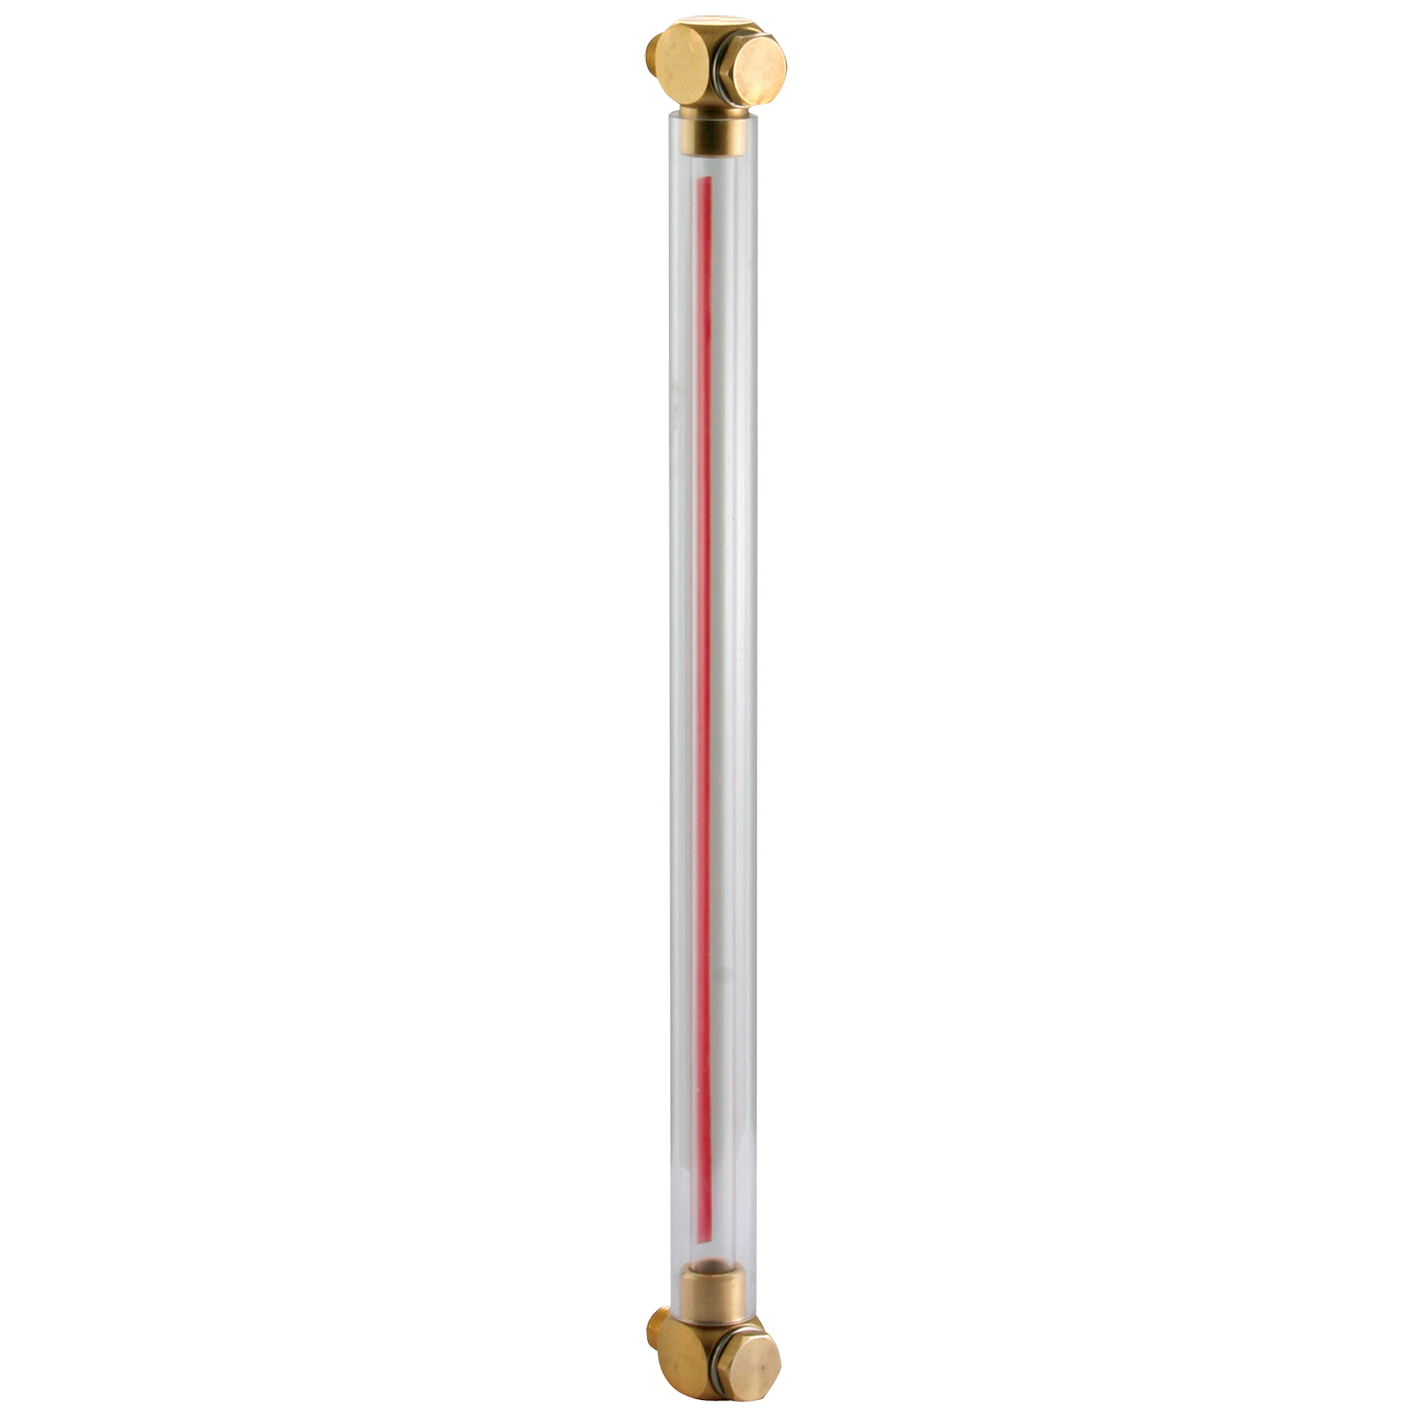 1/2" BSP Fluid Level Gauge W/O Thermometer Centres 400mm